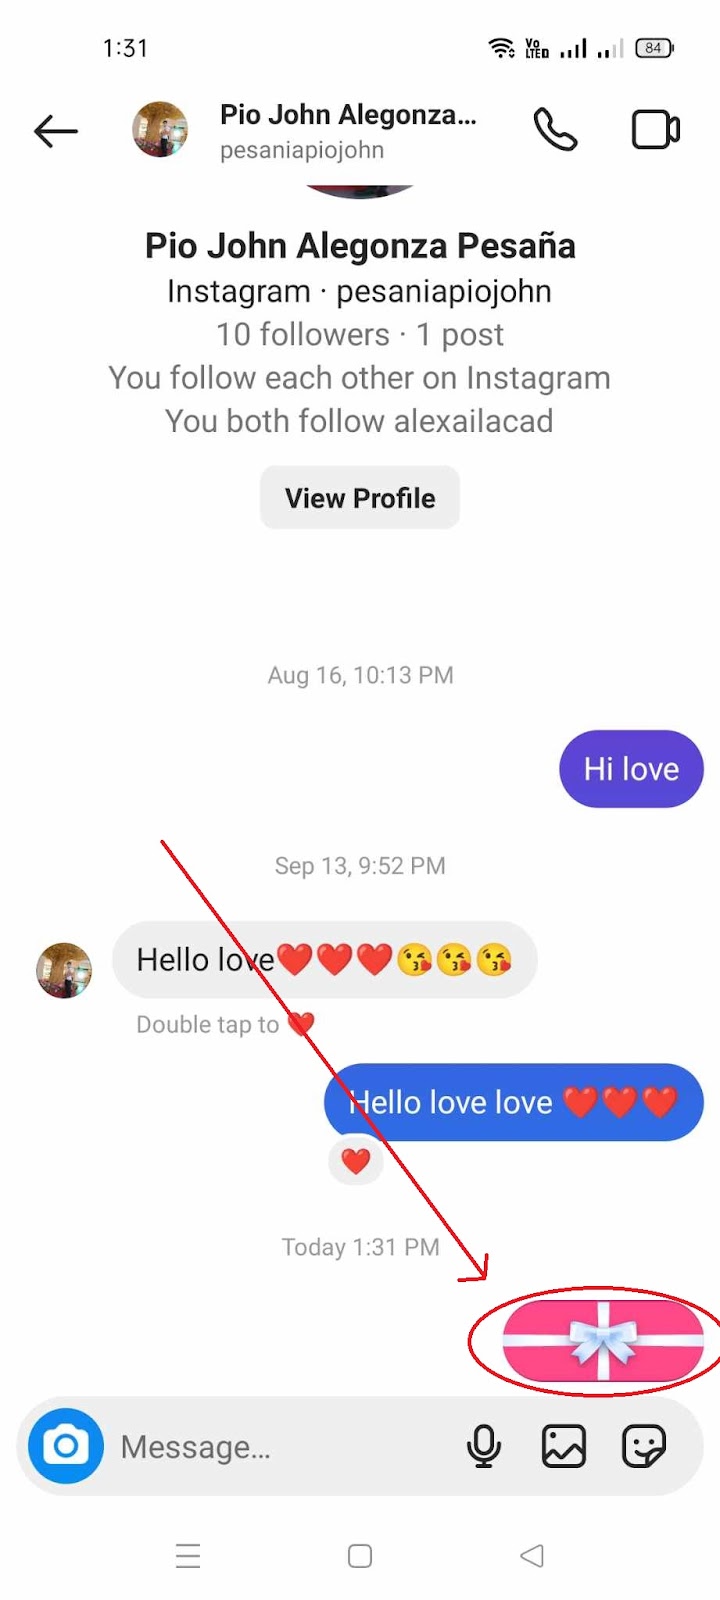 How to Send GIft Messages on Instagram - Send Gift Message